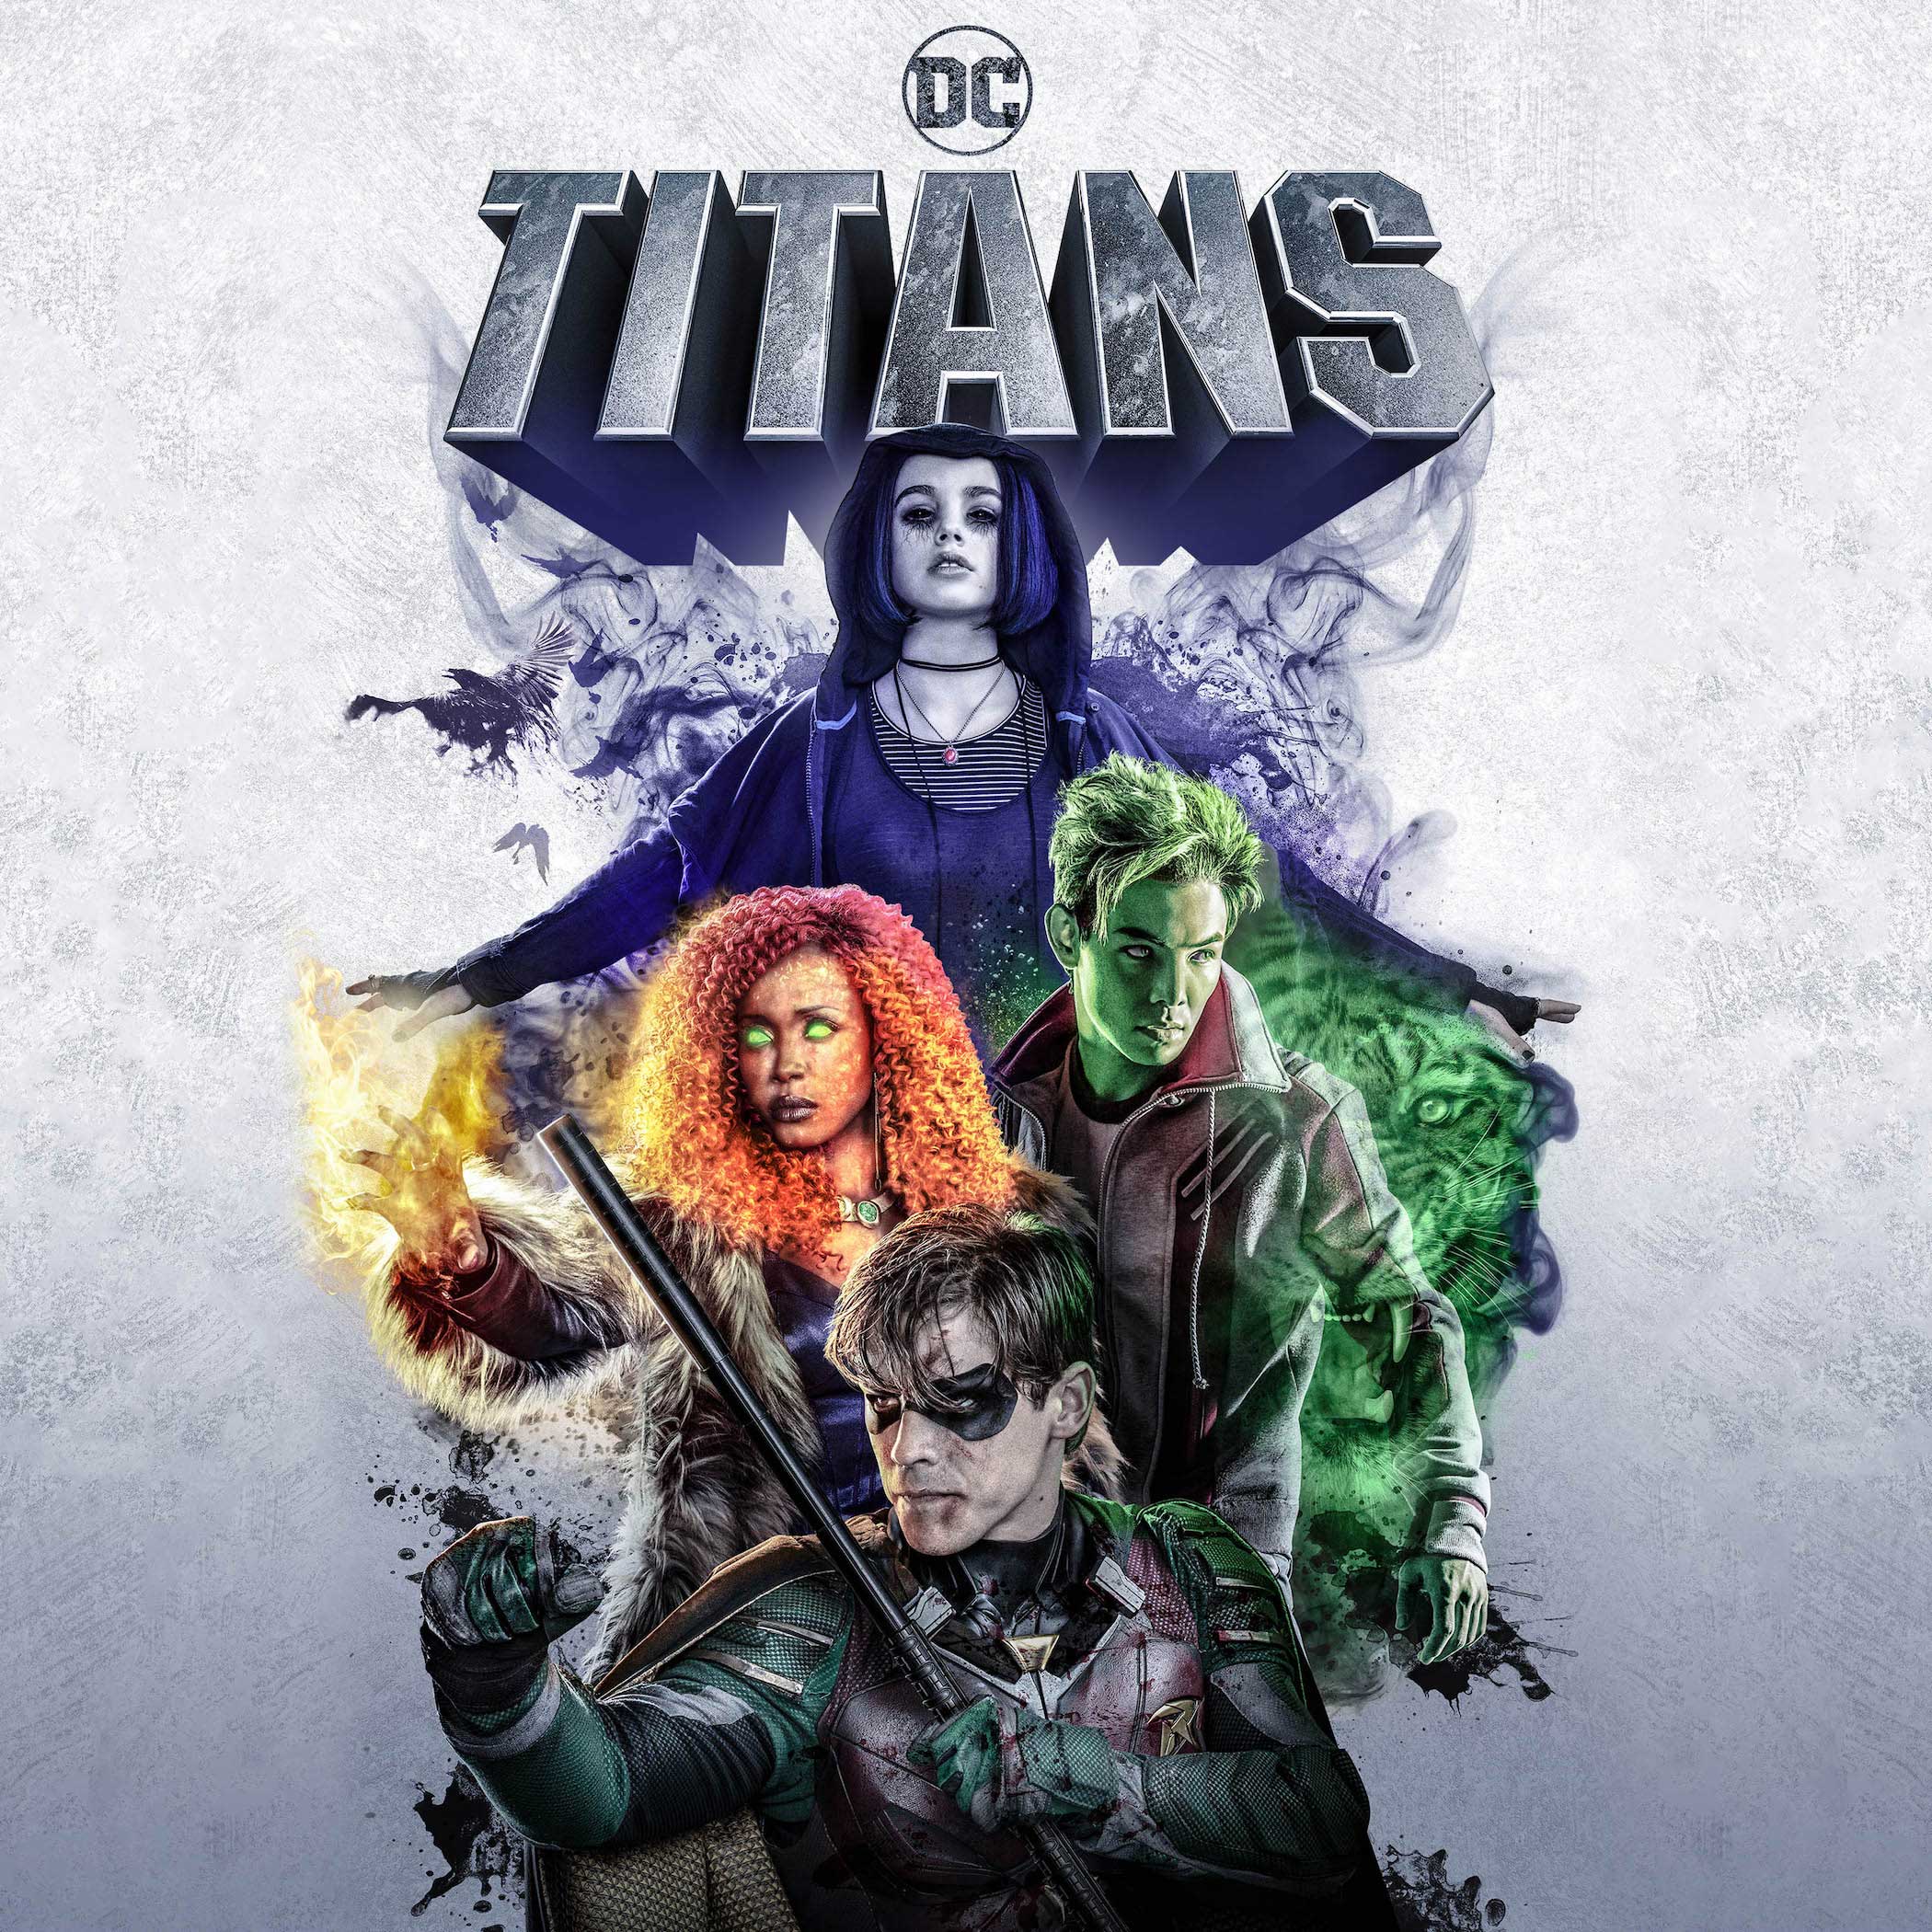 Dc S Titans Series Arrives On Digital And Blu Ray On March 21s — Major Spoilers — Comic Book